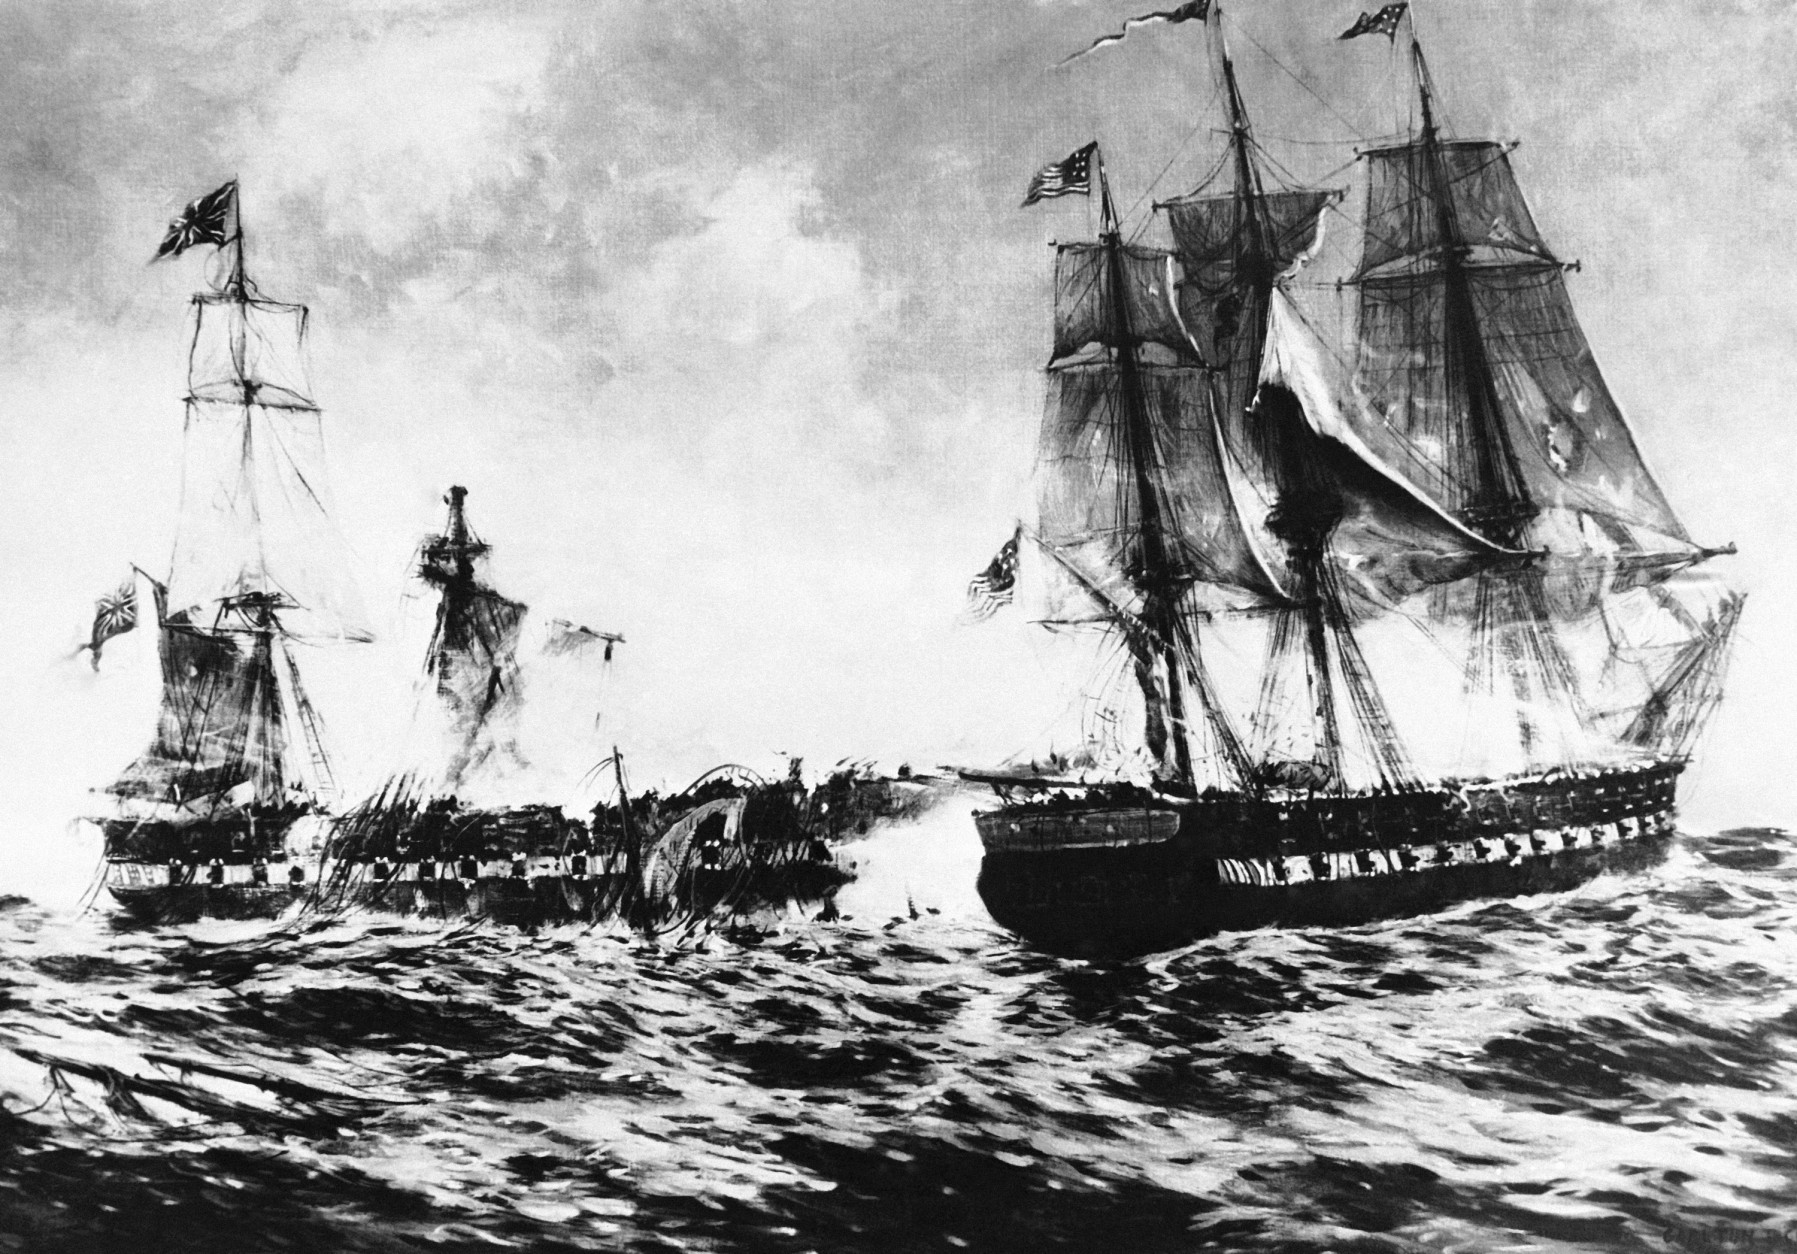 Pictorial representation of the War of 1812 naval battle between the U.S.S. Constitution and H.M.S. Java off Brazil  Dec. 29, 1812. Superior gunnery of the American reduced the Java to a complete wreck while the Constitution remained practically unhurt. (AP Photo)